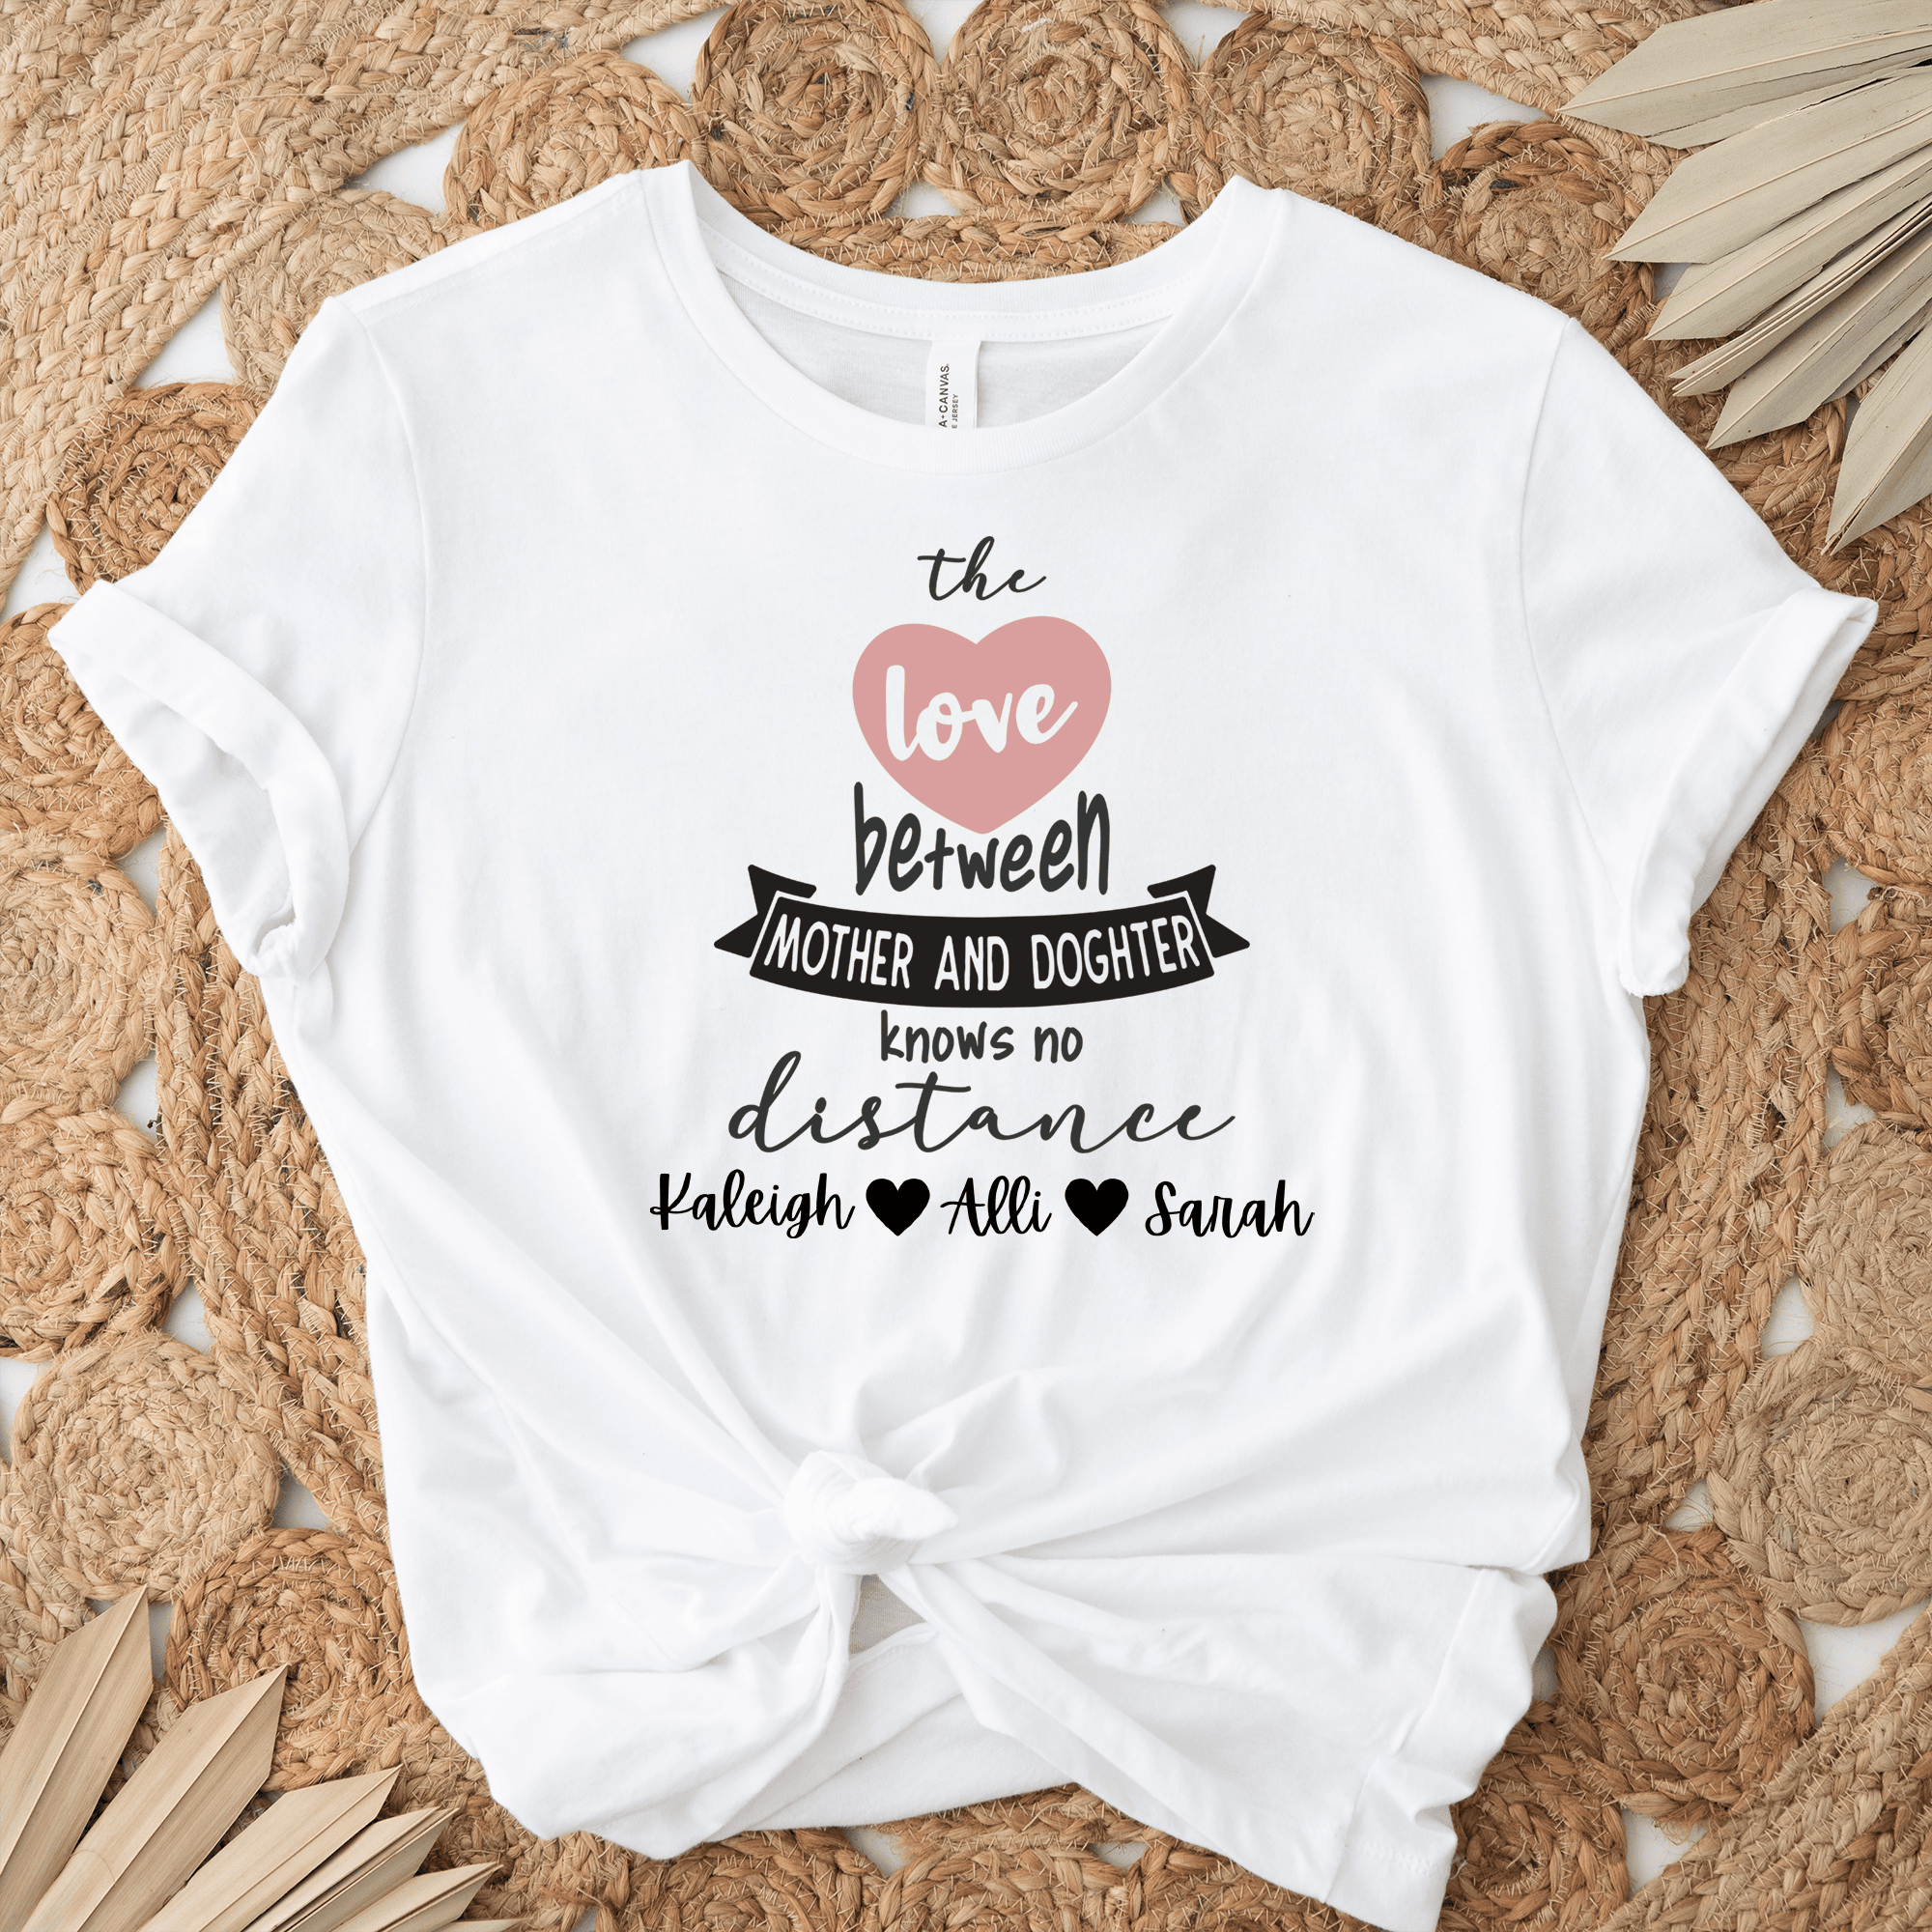 Womens White T Shirt with Mothers-And-Daughters design